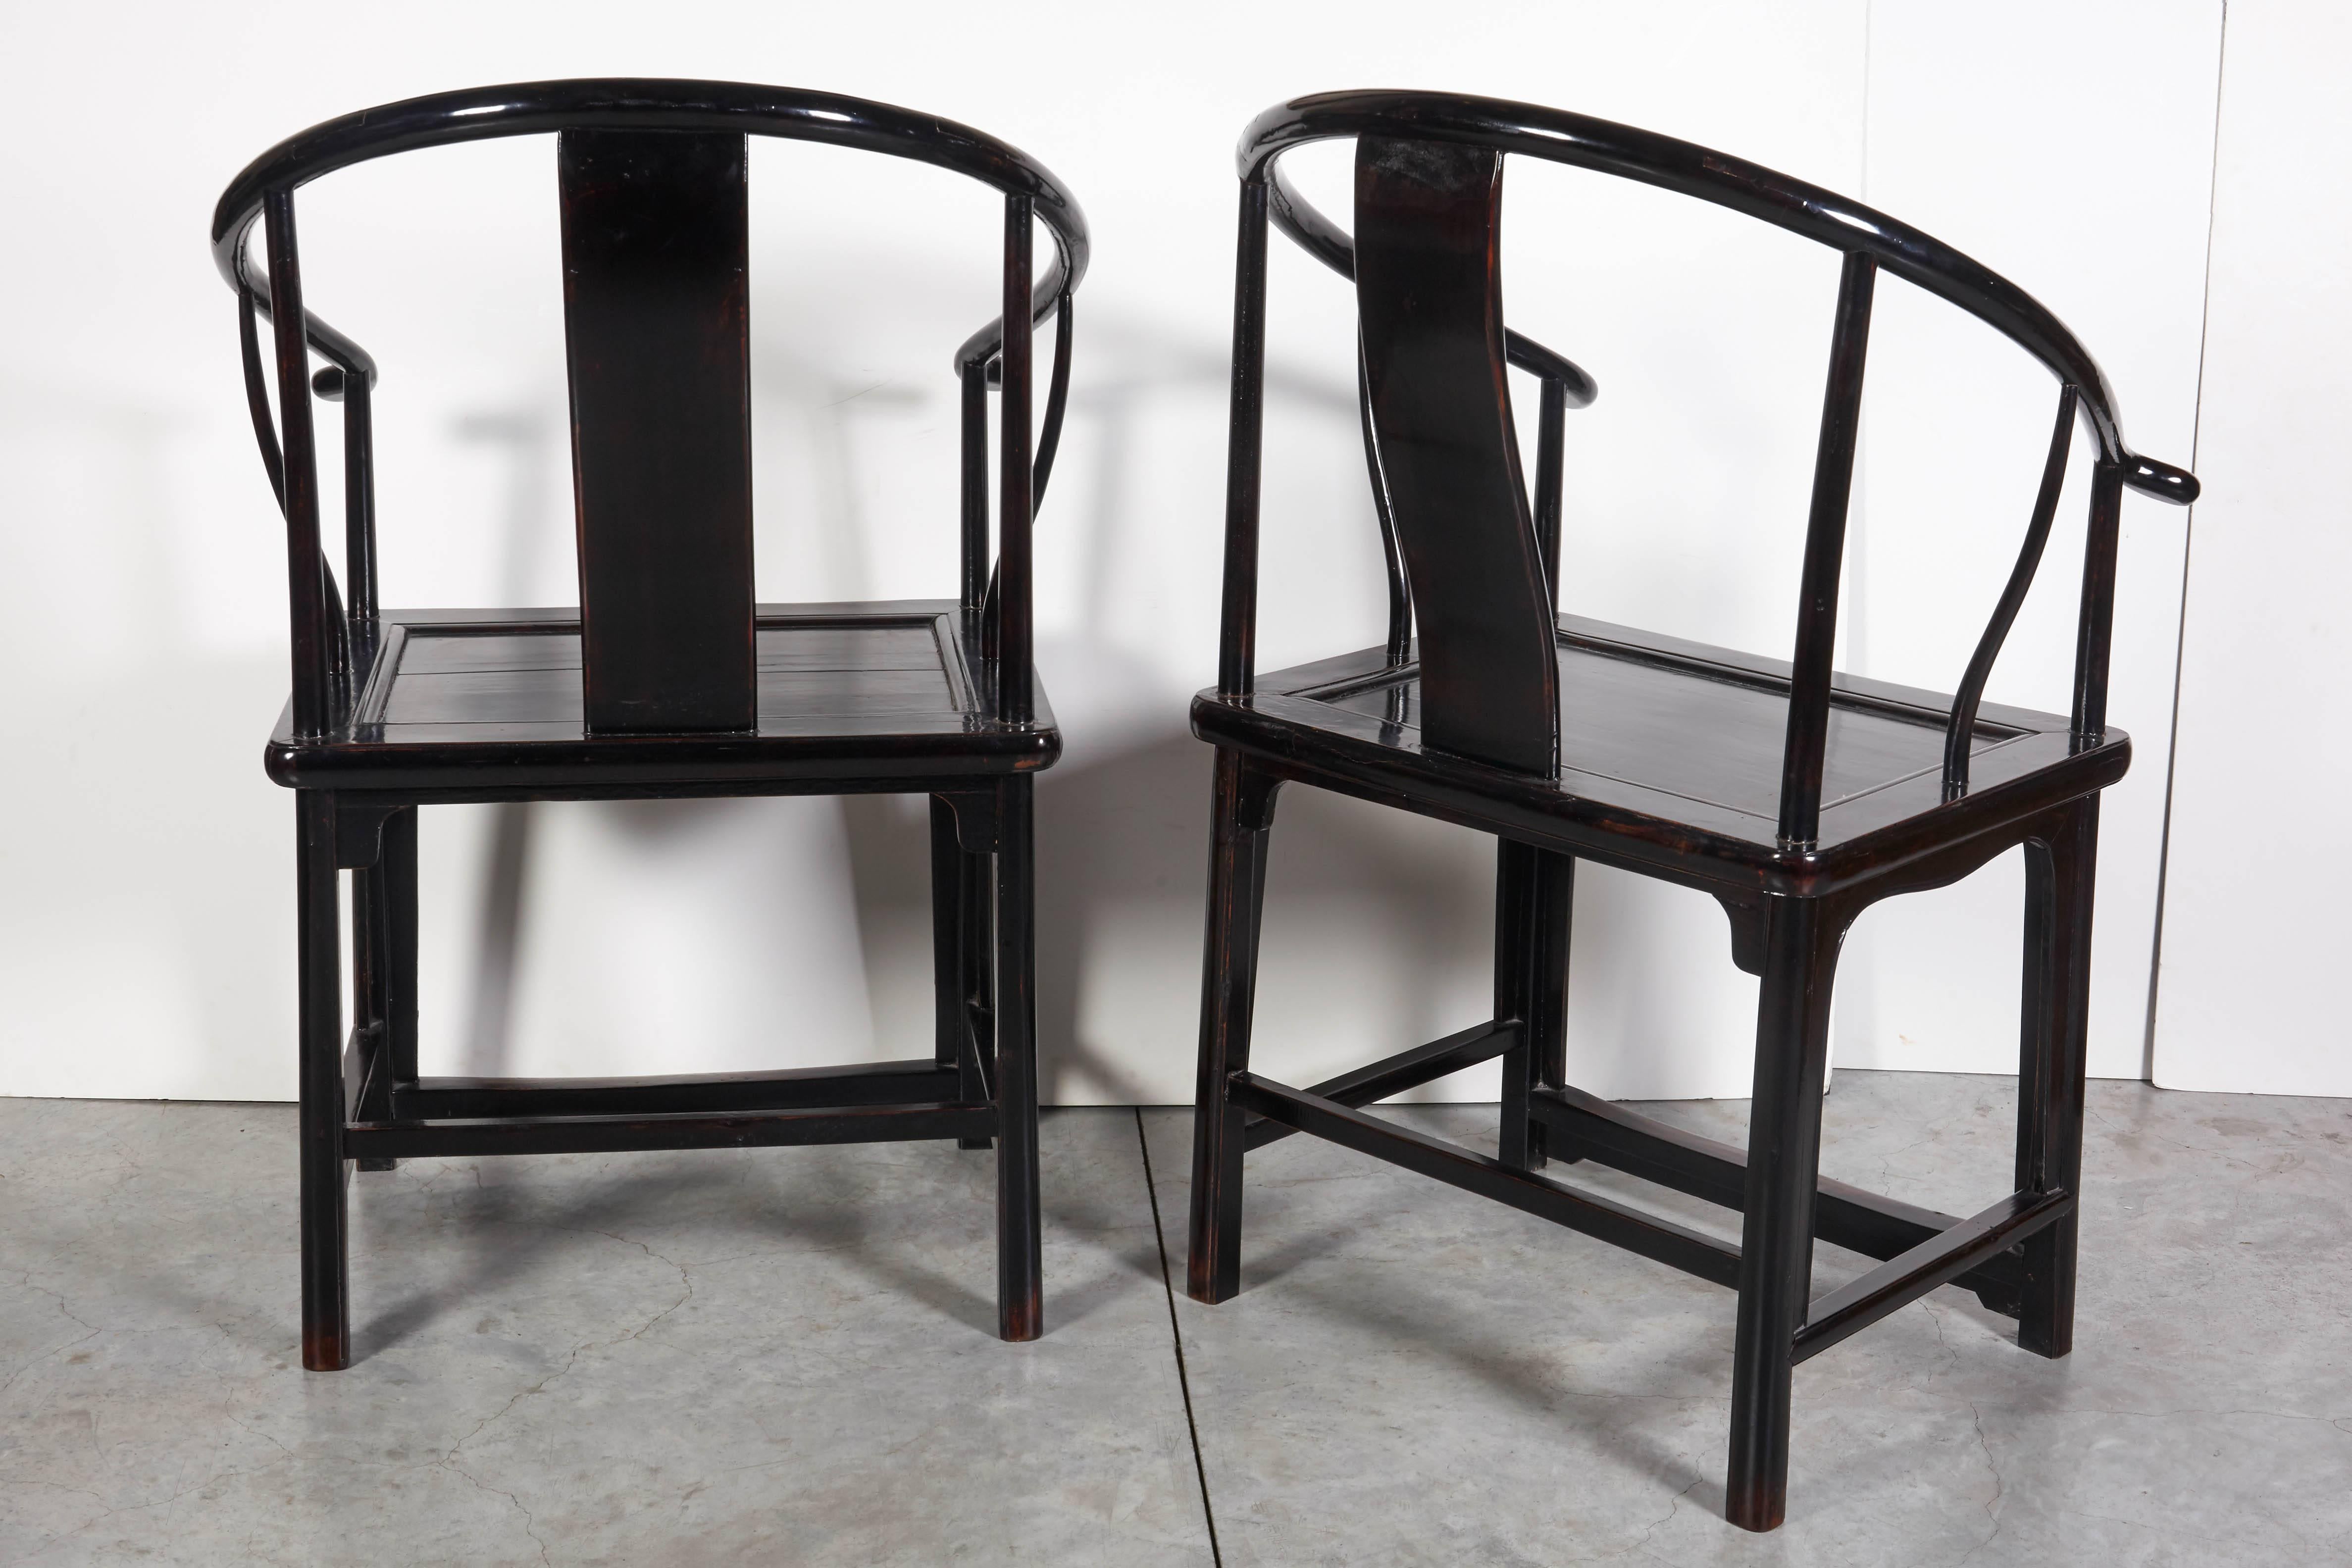 20th Century Pair of Antique Chinese Lacquer Horseshoe Back Chairs For Sale